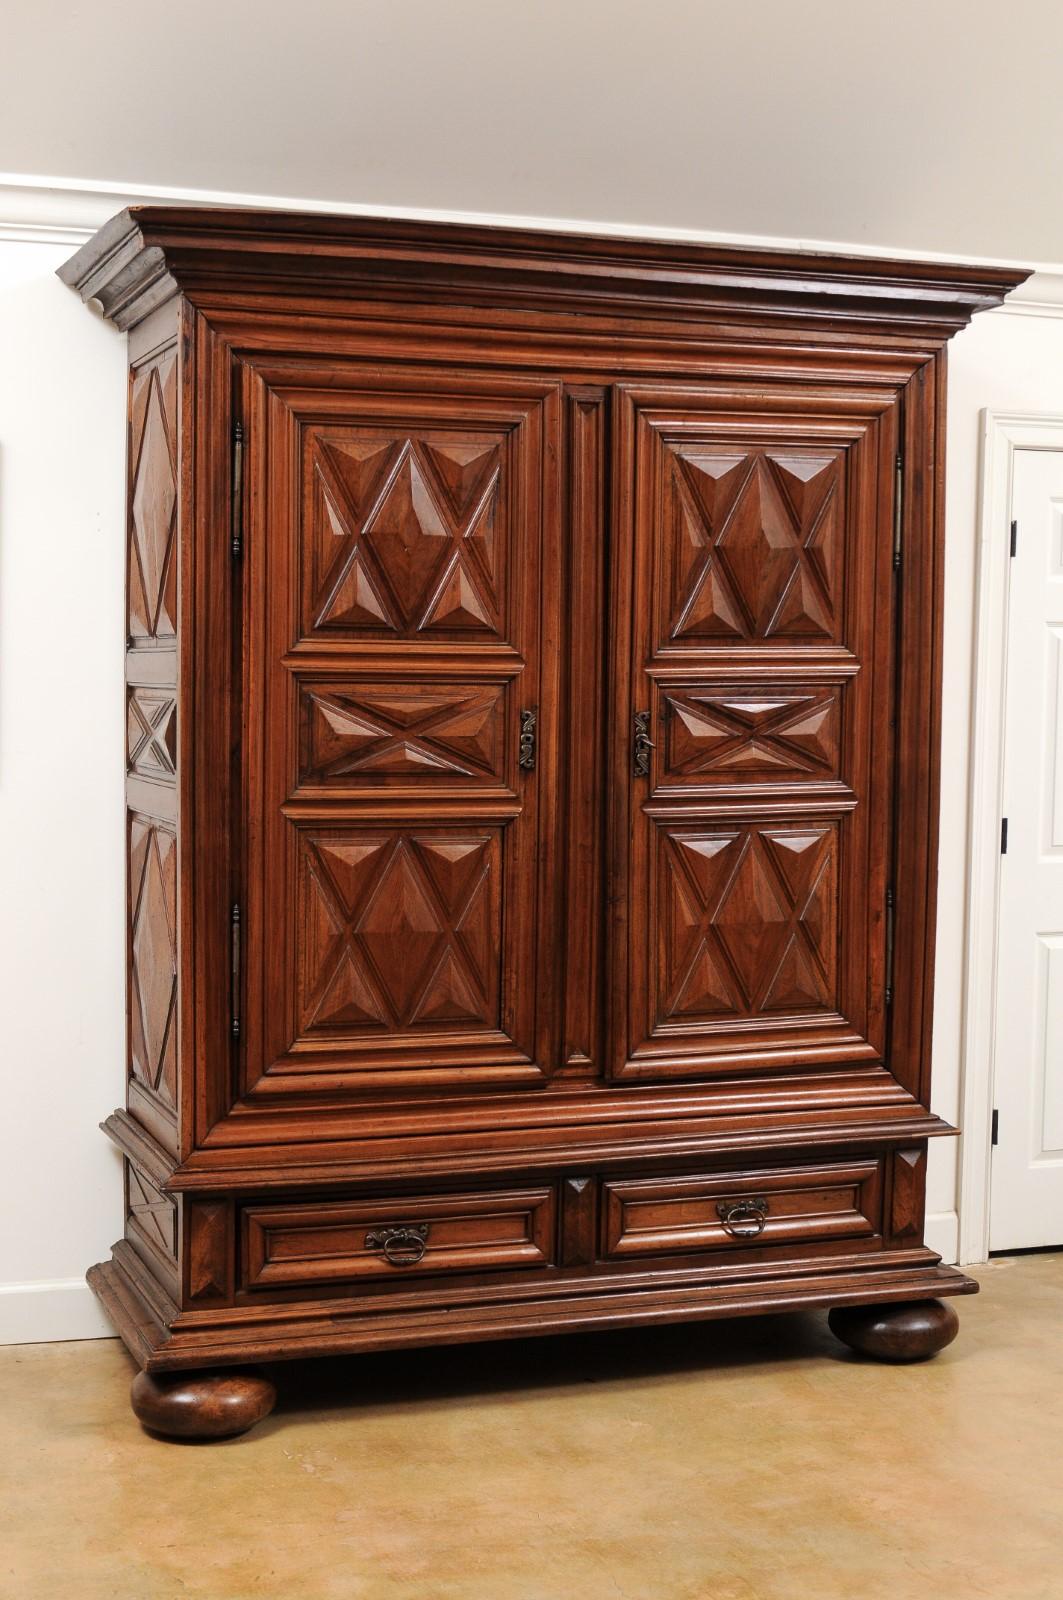 A French Louis XIII style walnut armoire from the 19th century, with raised diamond motifs, doors and drawers. Born in France during the 19th century, this stunning walnut armoire features a molded cornice overhanging a geometric front adorned with